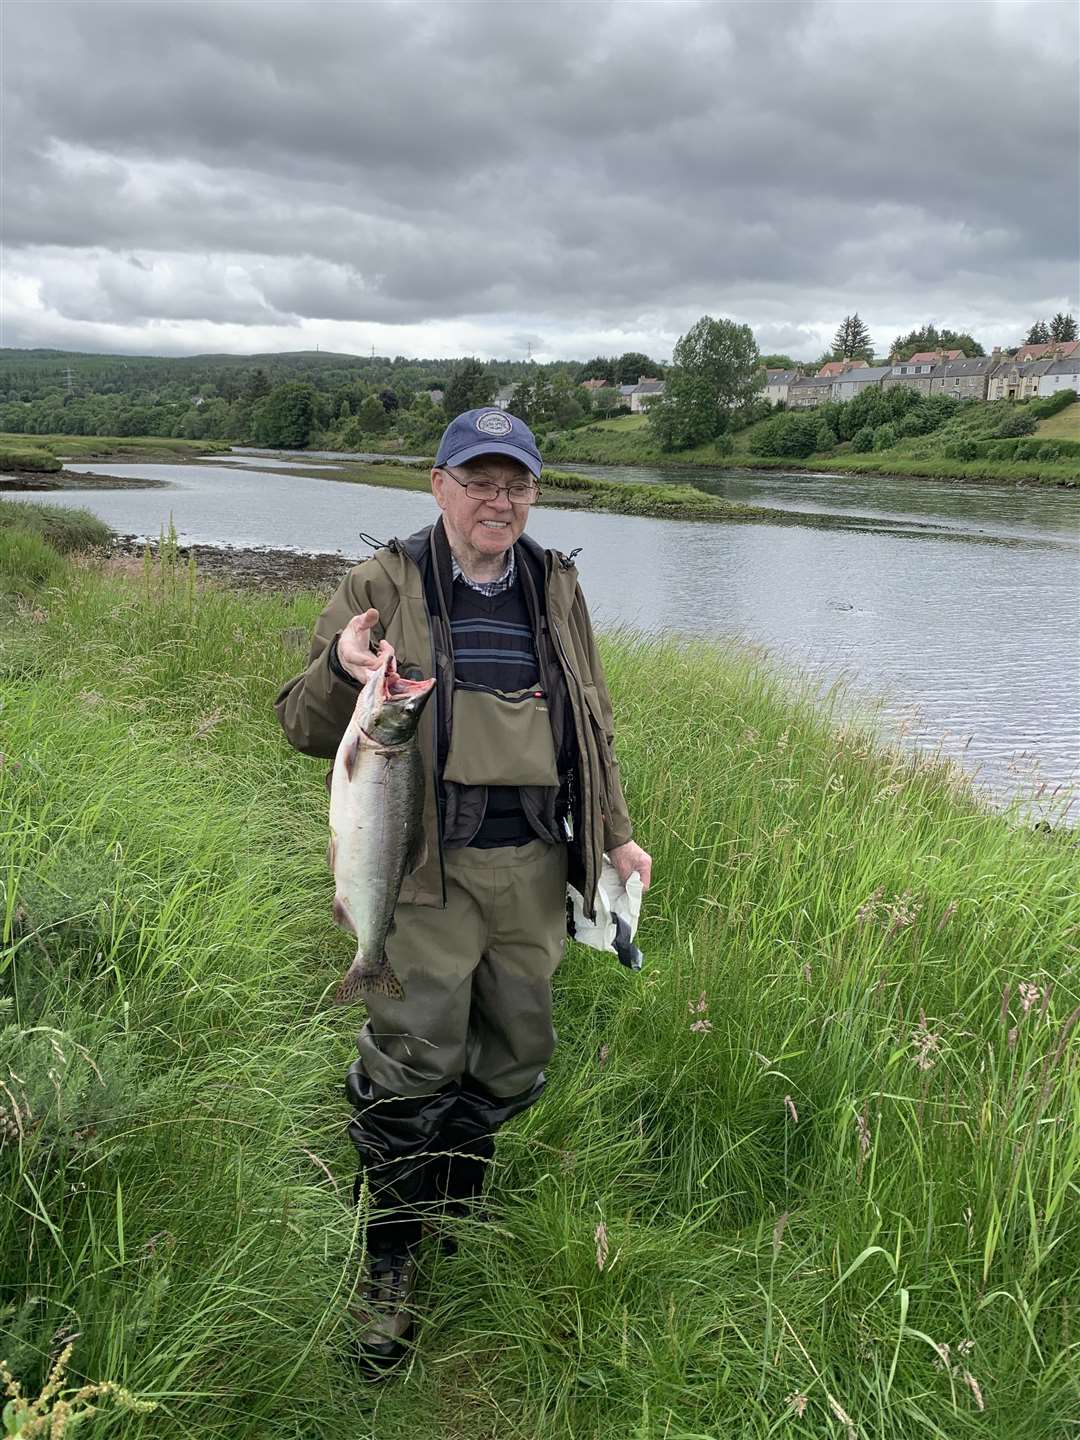 Douglas Macleay, vice-chairman of the Kyle of Sutherland Angling Association with a pink salmon caught in the Kyle at Bonar Bridge.